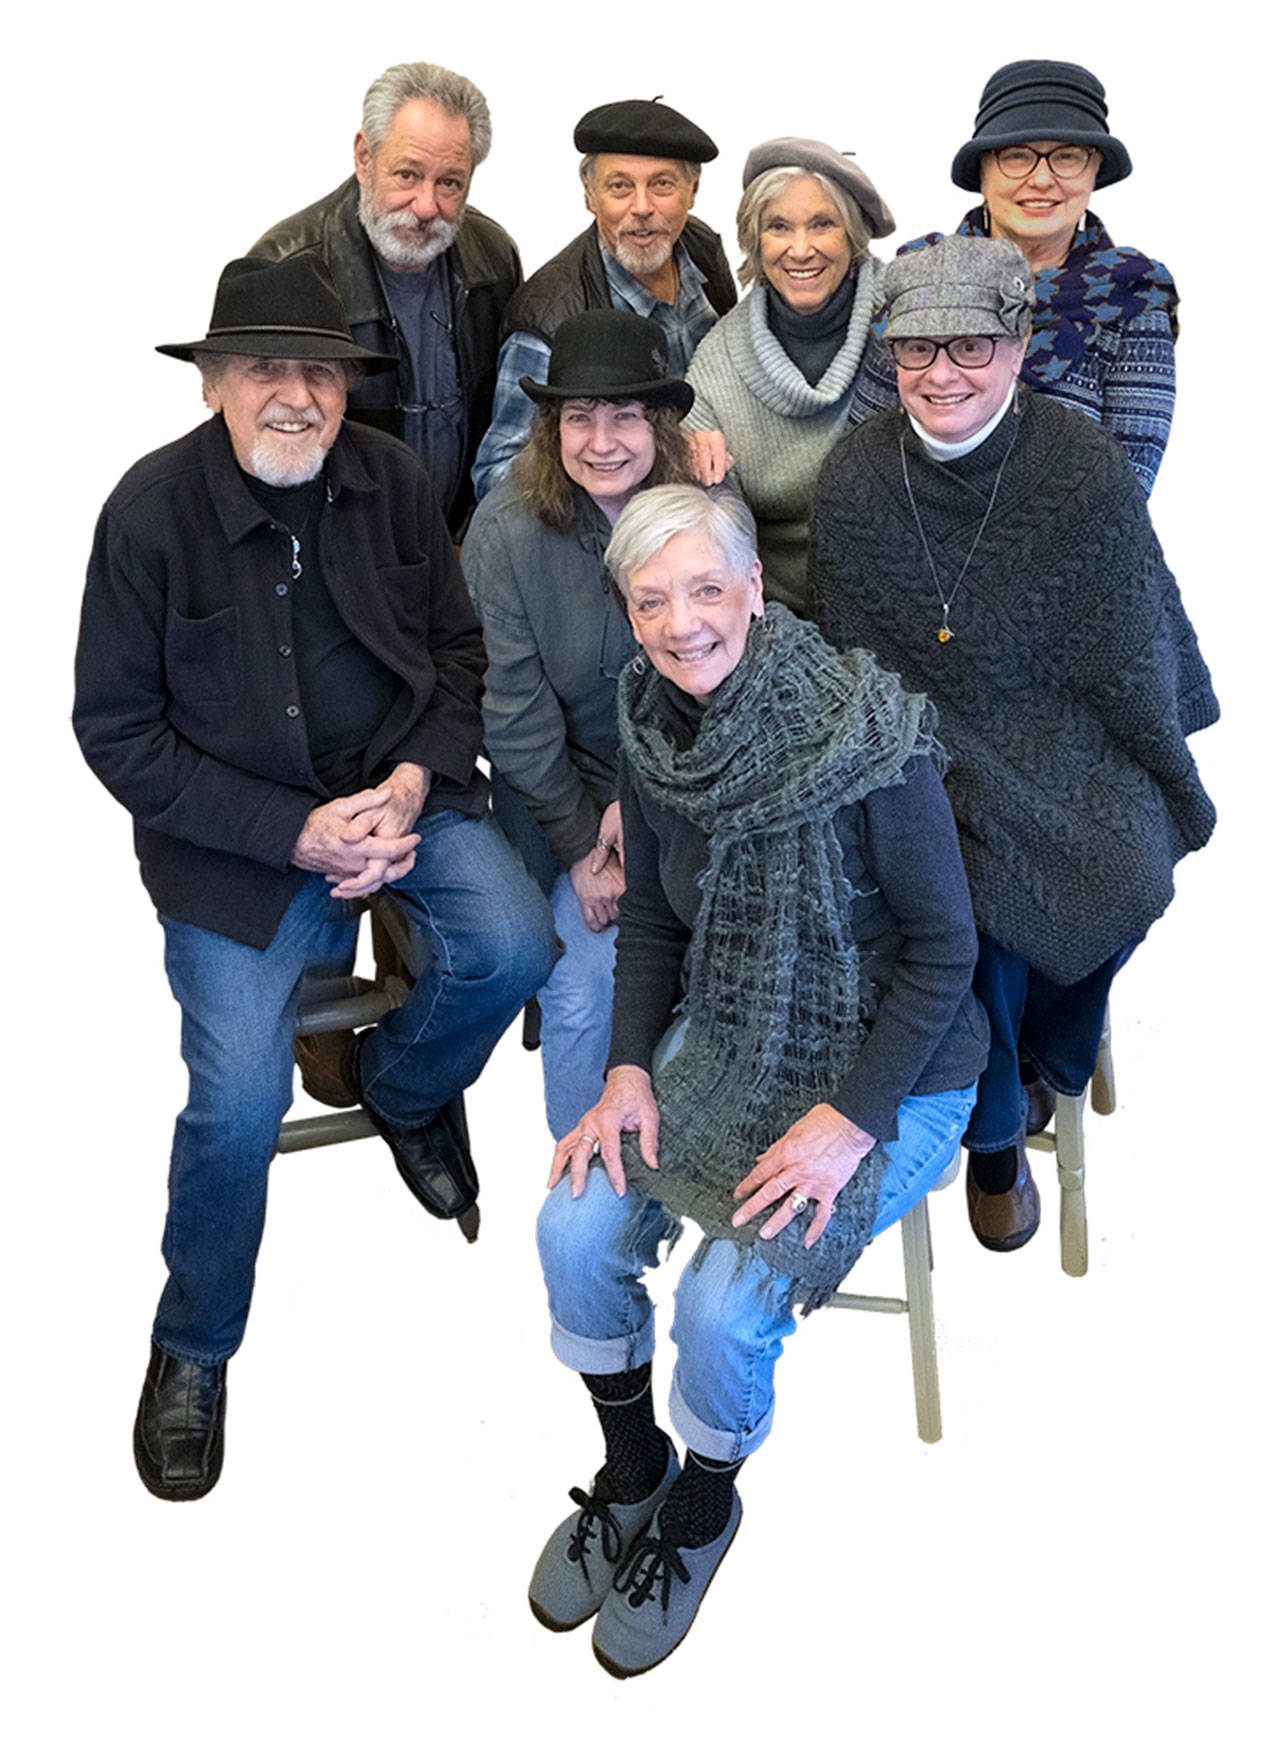 Back row, from left, are 2019 ARTJAM artists Stephen Portner, Brian Buntain, Lynne Armstrong and Mary Franchini, with, front row, from left, Ed Crumley, Tammy Hall and Linda Collins Chapman, and Susan Gansert Shaw in front.